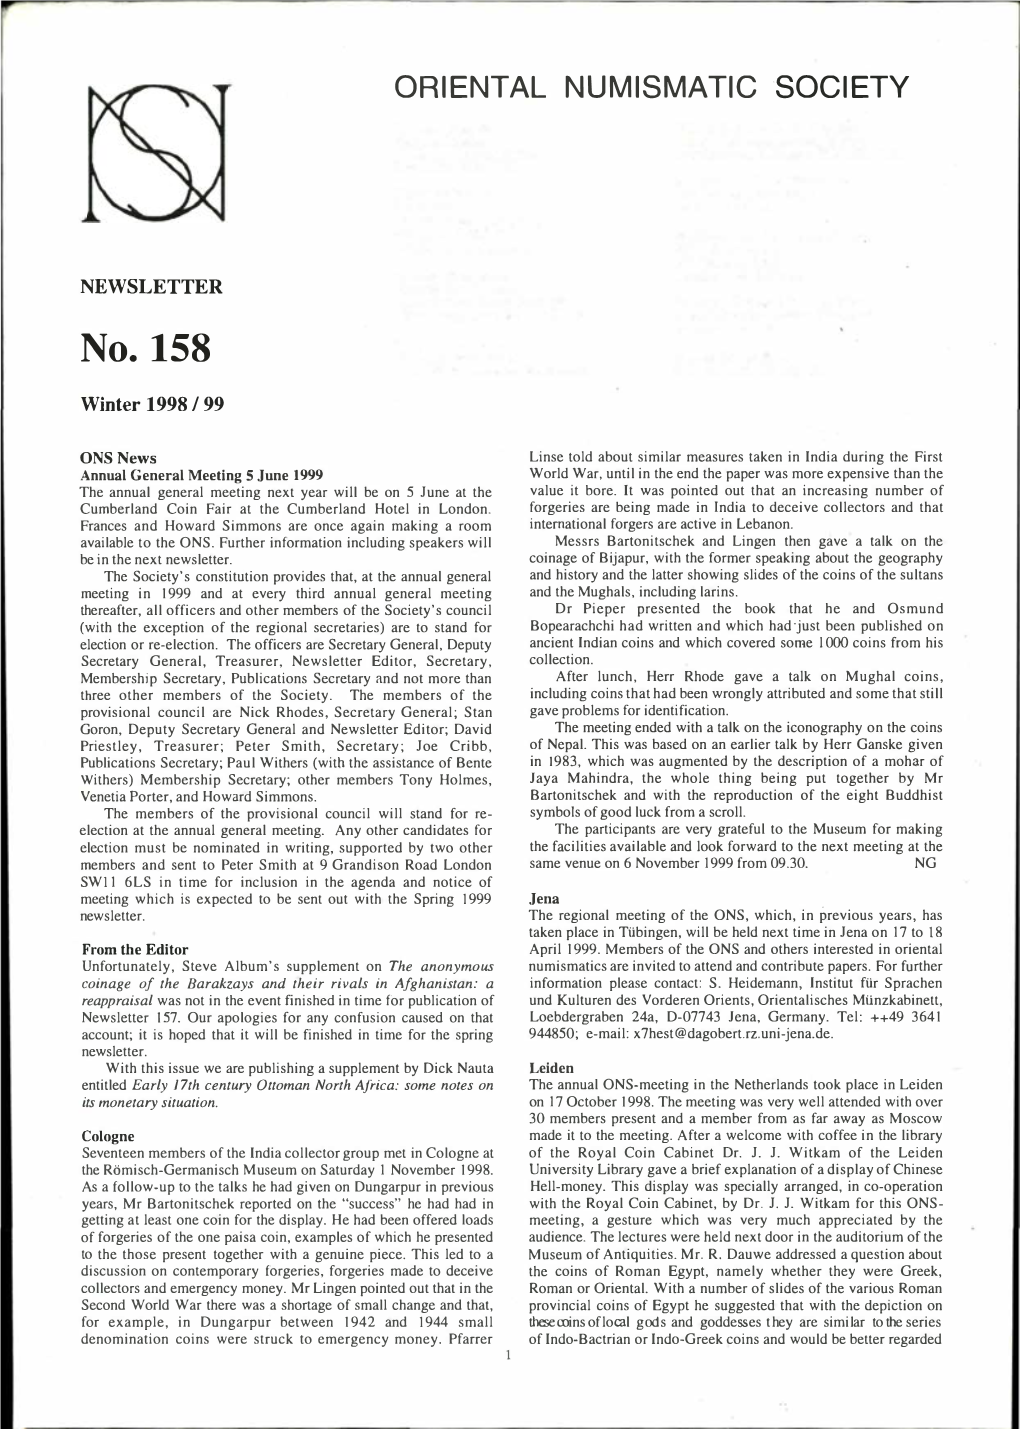 Newsletter No. 158 Winter 1998/99 Early 17Th Century Ottoman North Africa